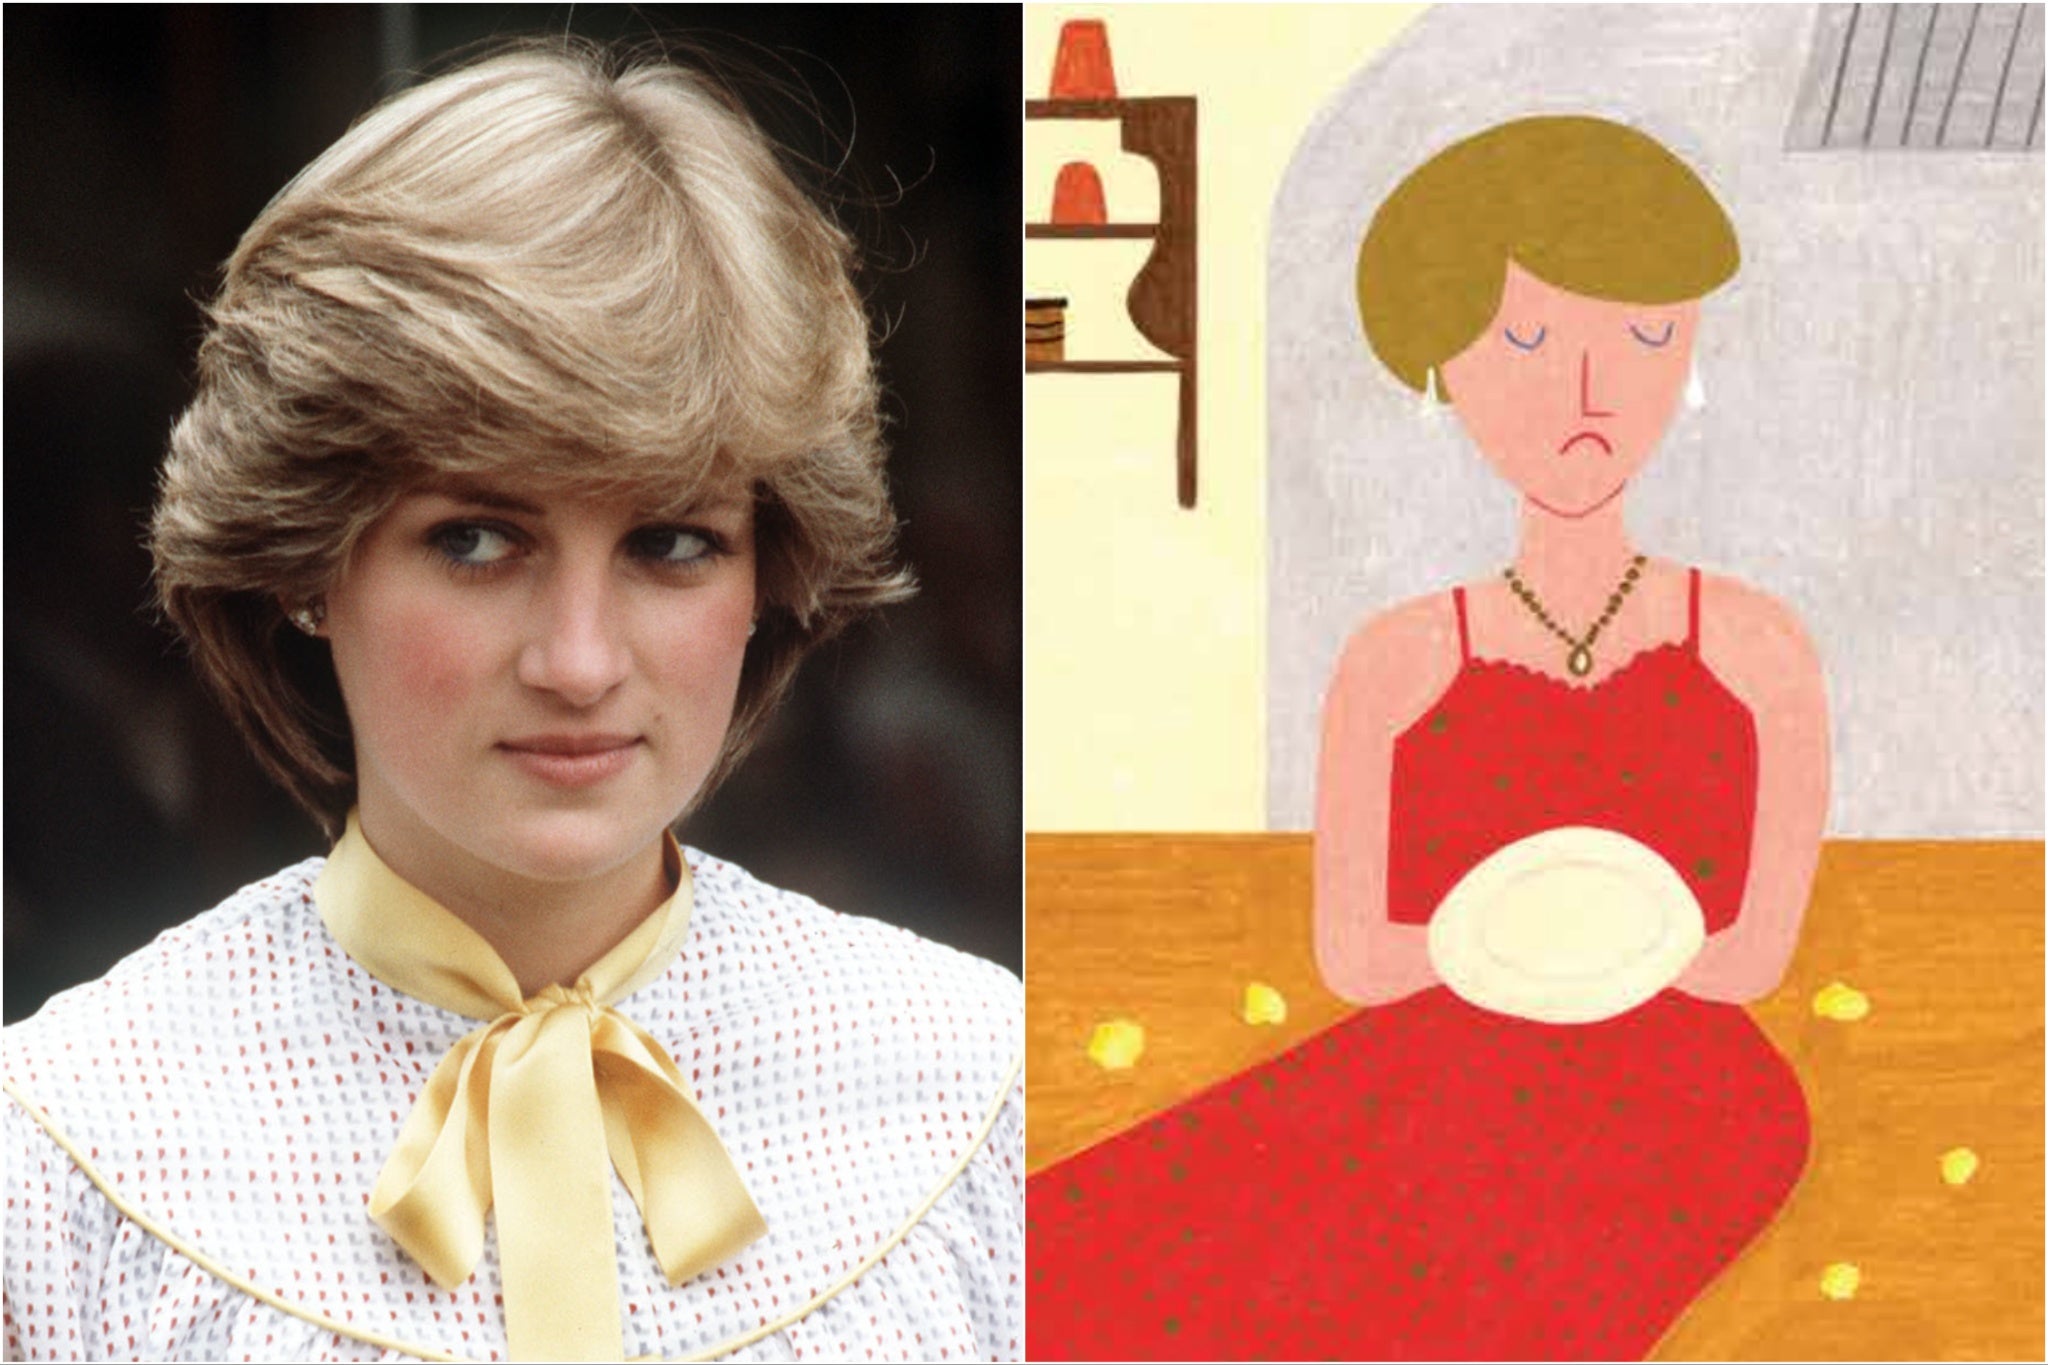 Princess Diana, and an illustration in her forthcoming edition of the ‘Little People, Big Dreams’ book series